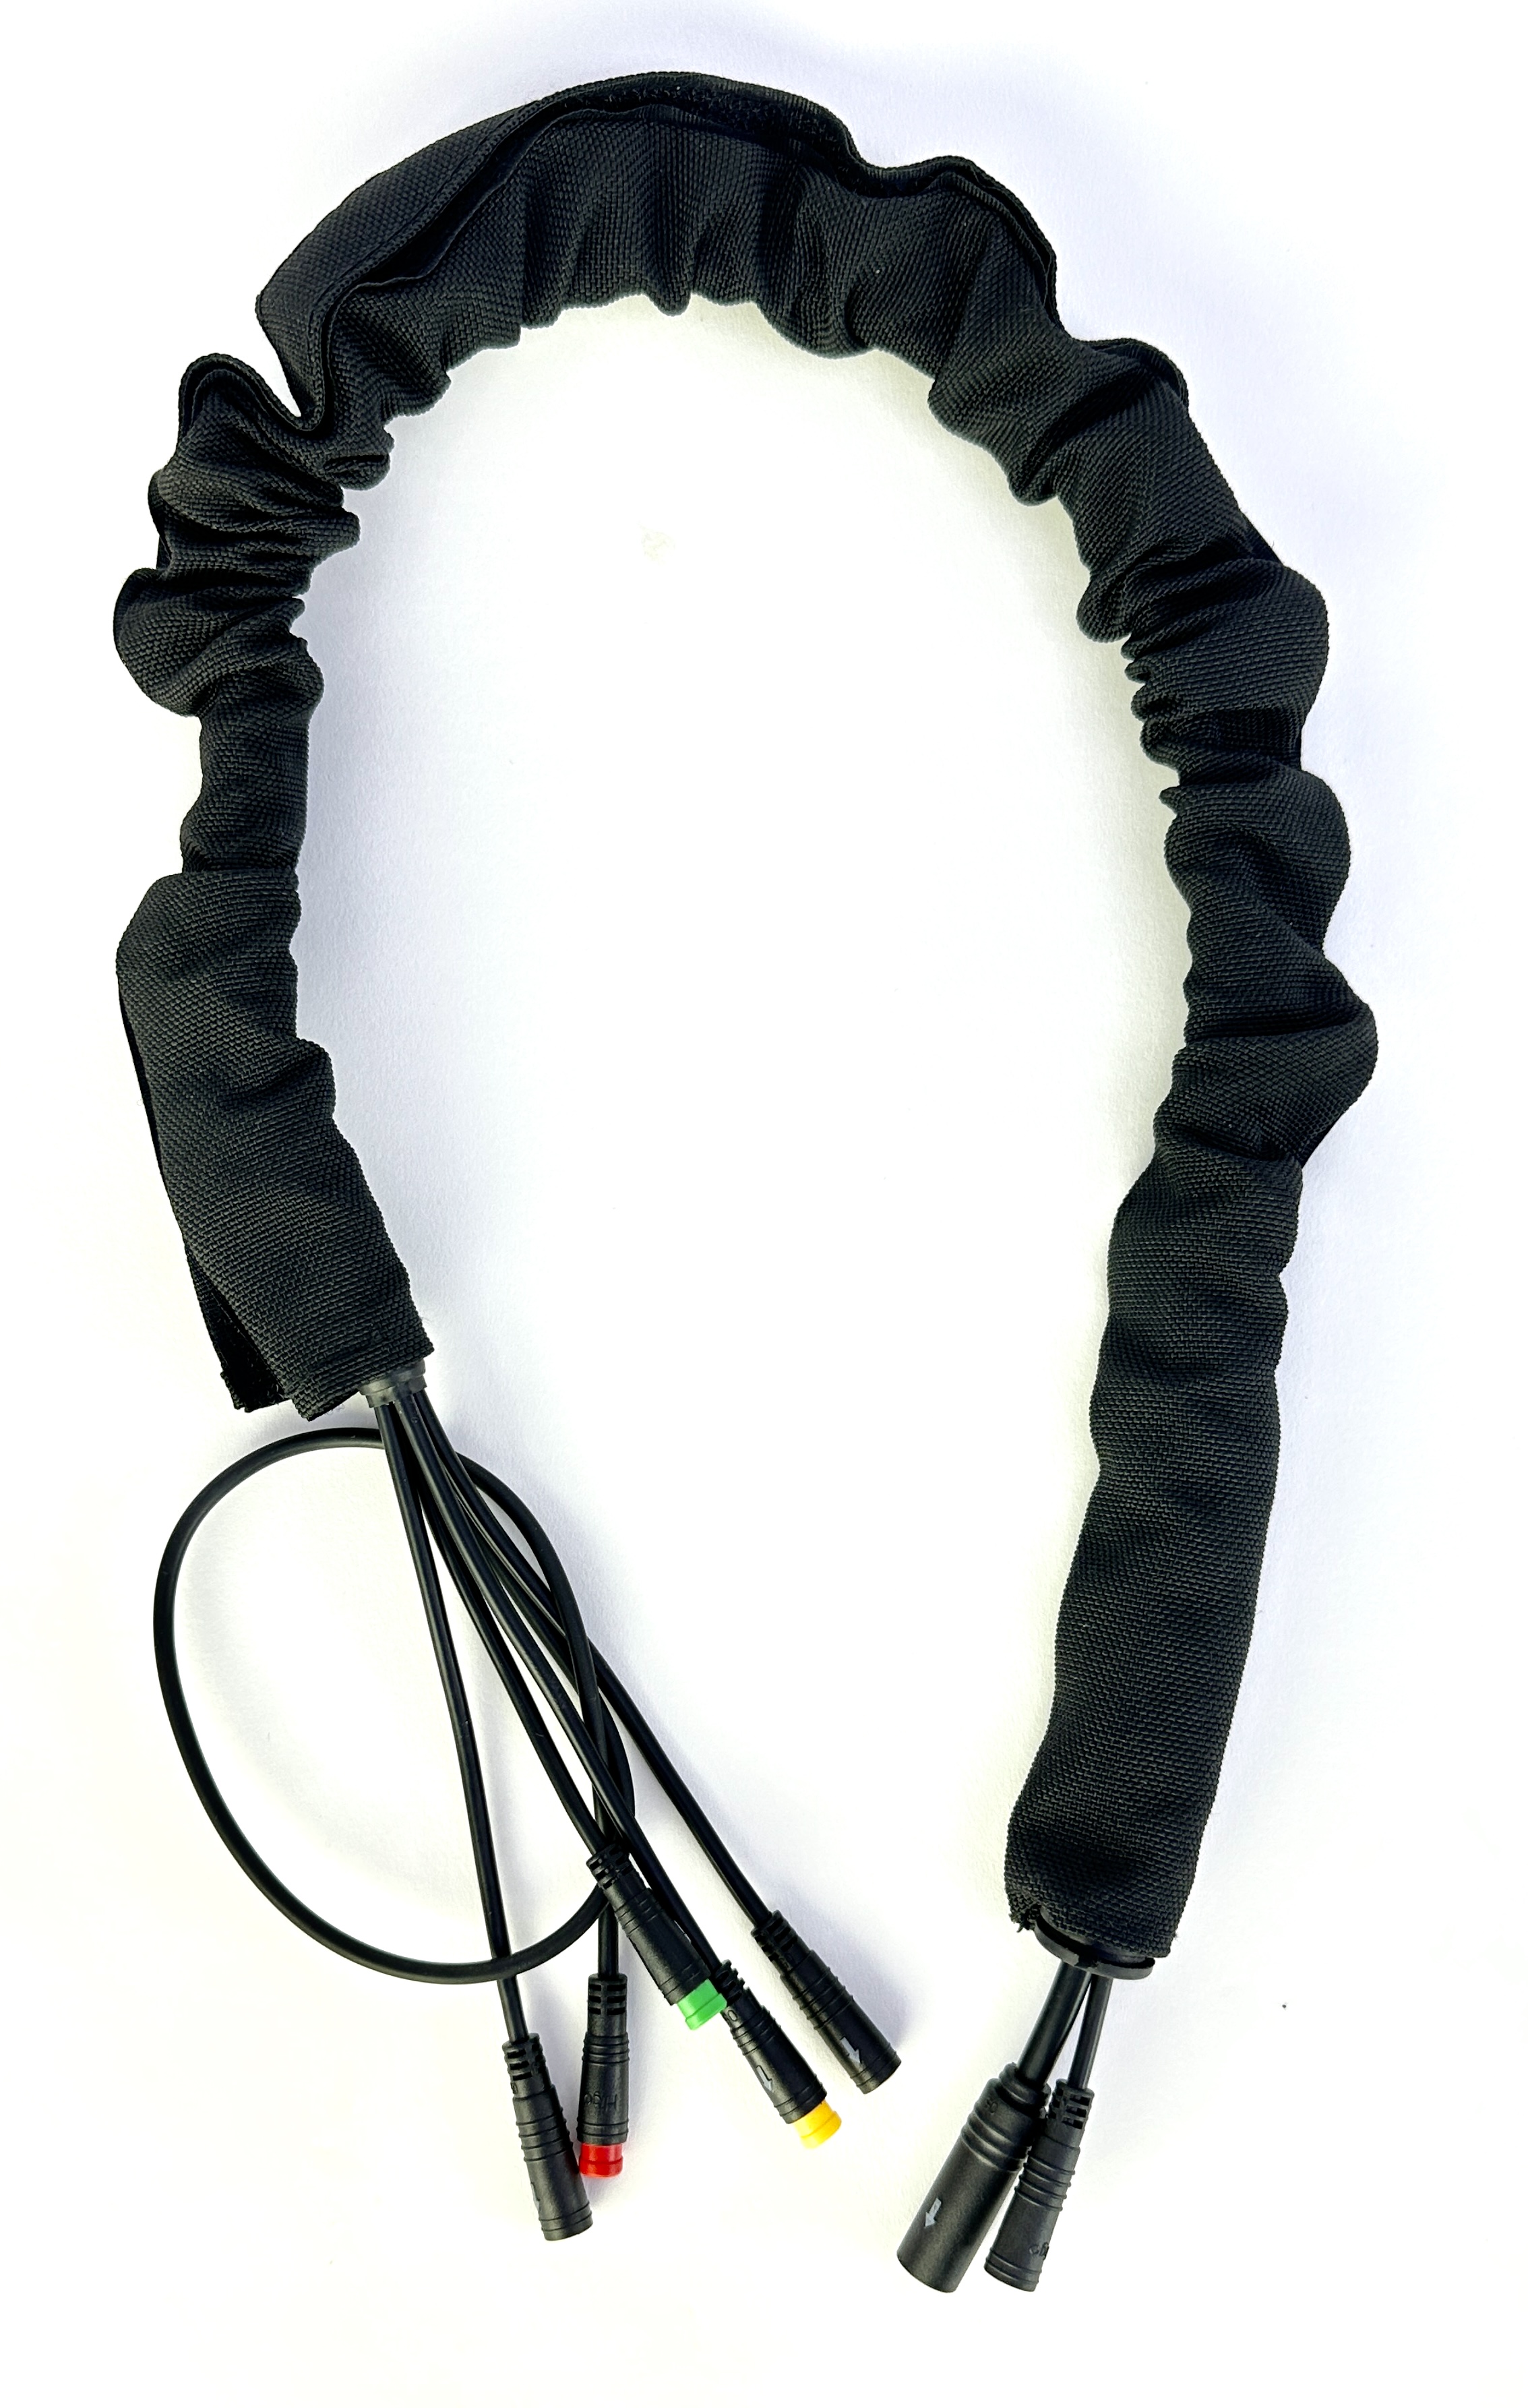 Bafang 1T4 wiring harness 70 cm / 27,55 inches with 2 PIN extension in cable protection hose